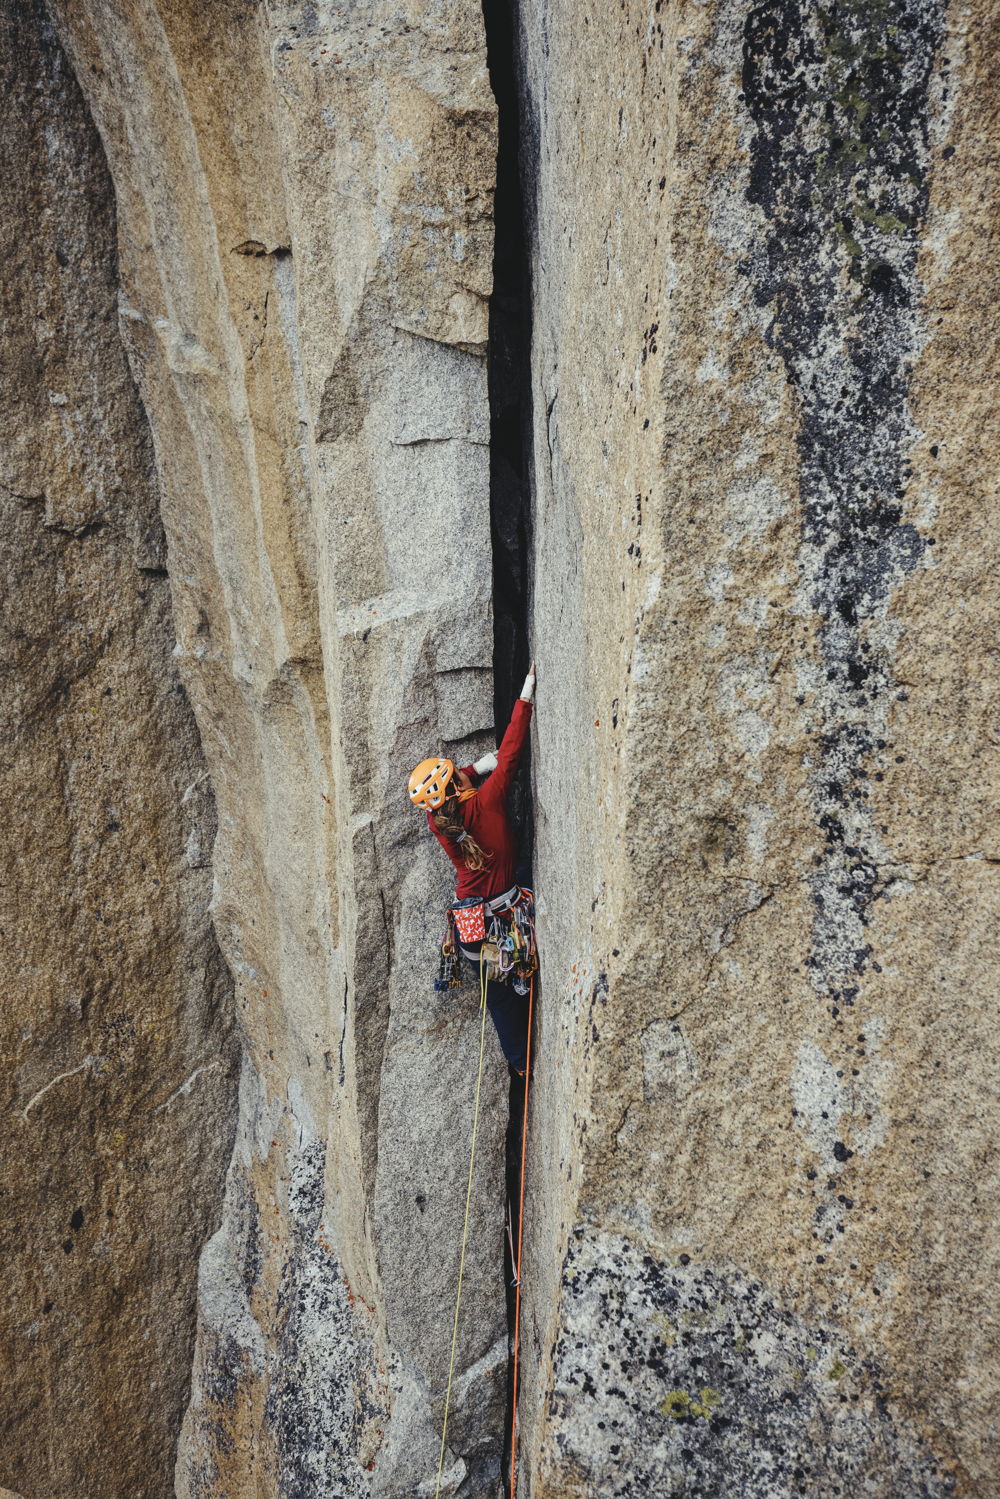 © Mammut Sports Group AG, Will Saunders